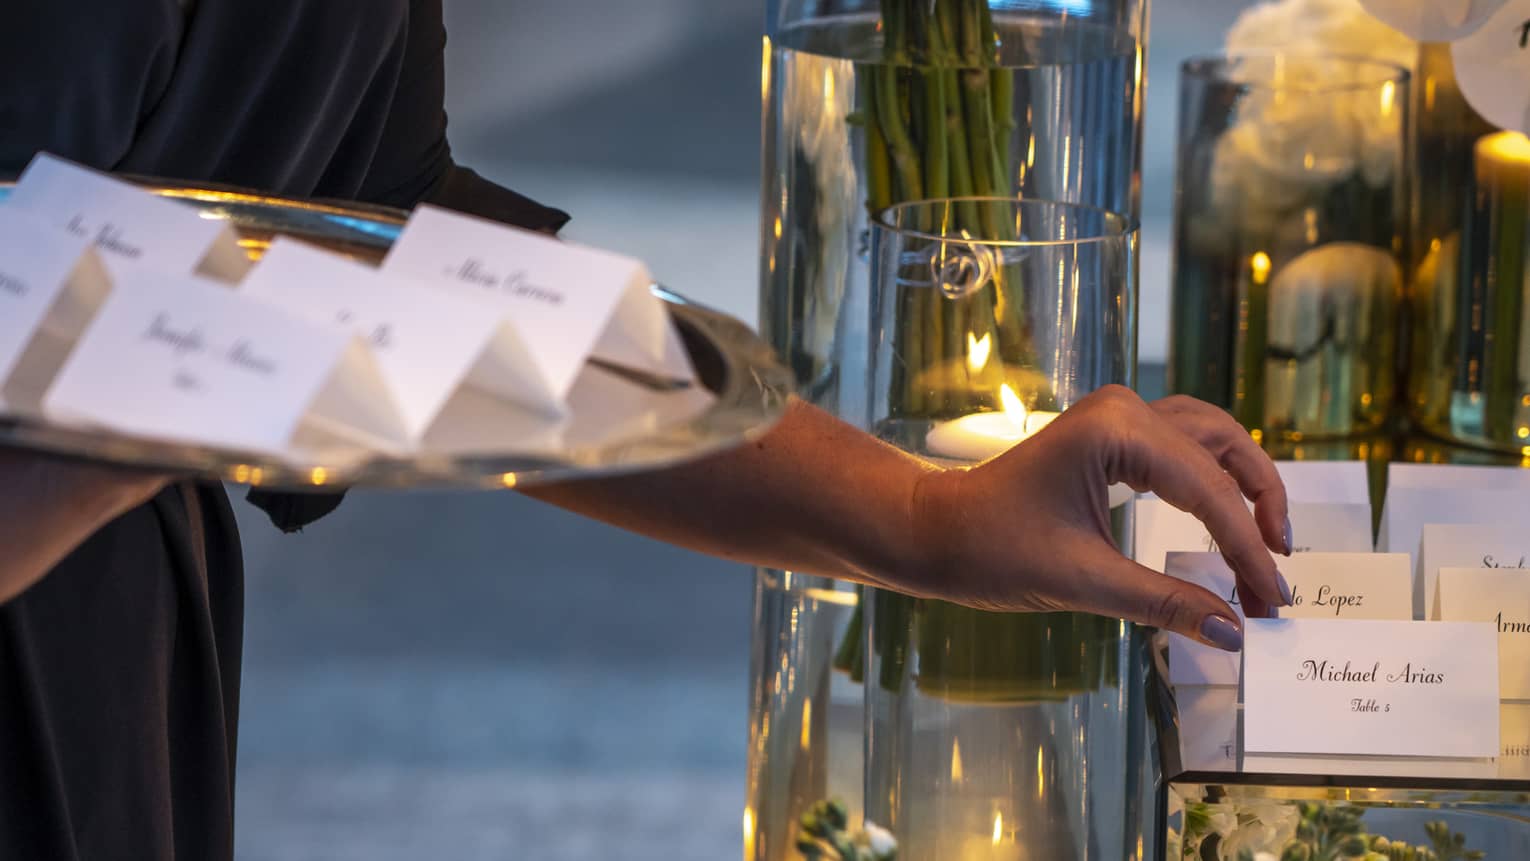 Close-up of hands placing name cards on banquet table with candles, flowers